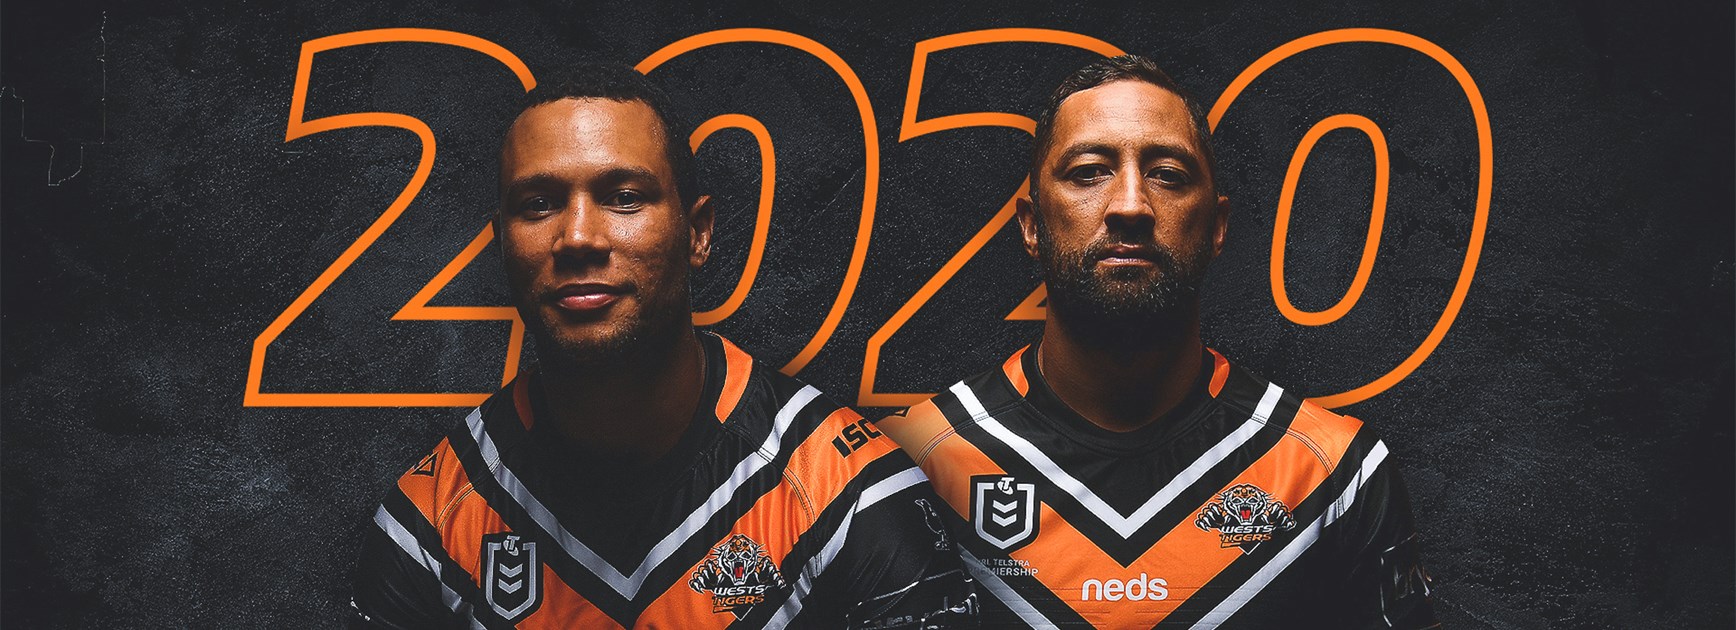 Wests Tigers confirm captains for 2020 season